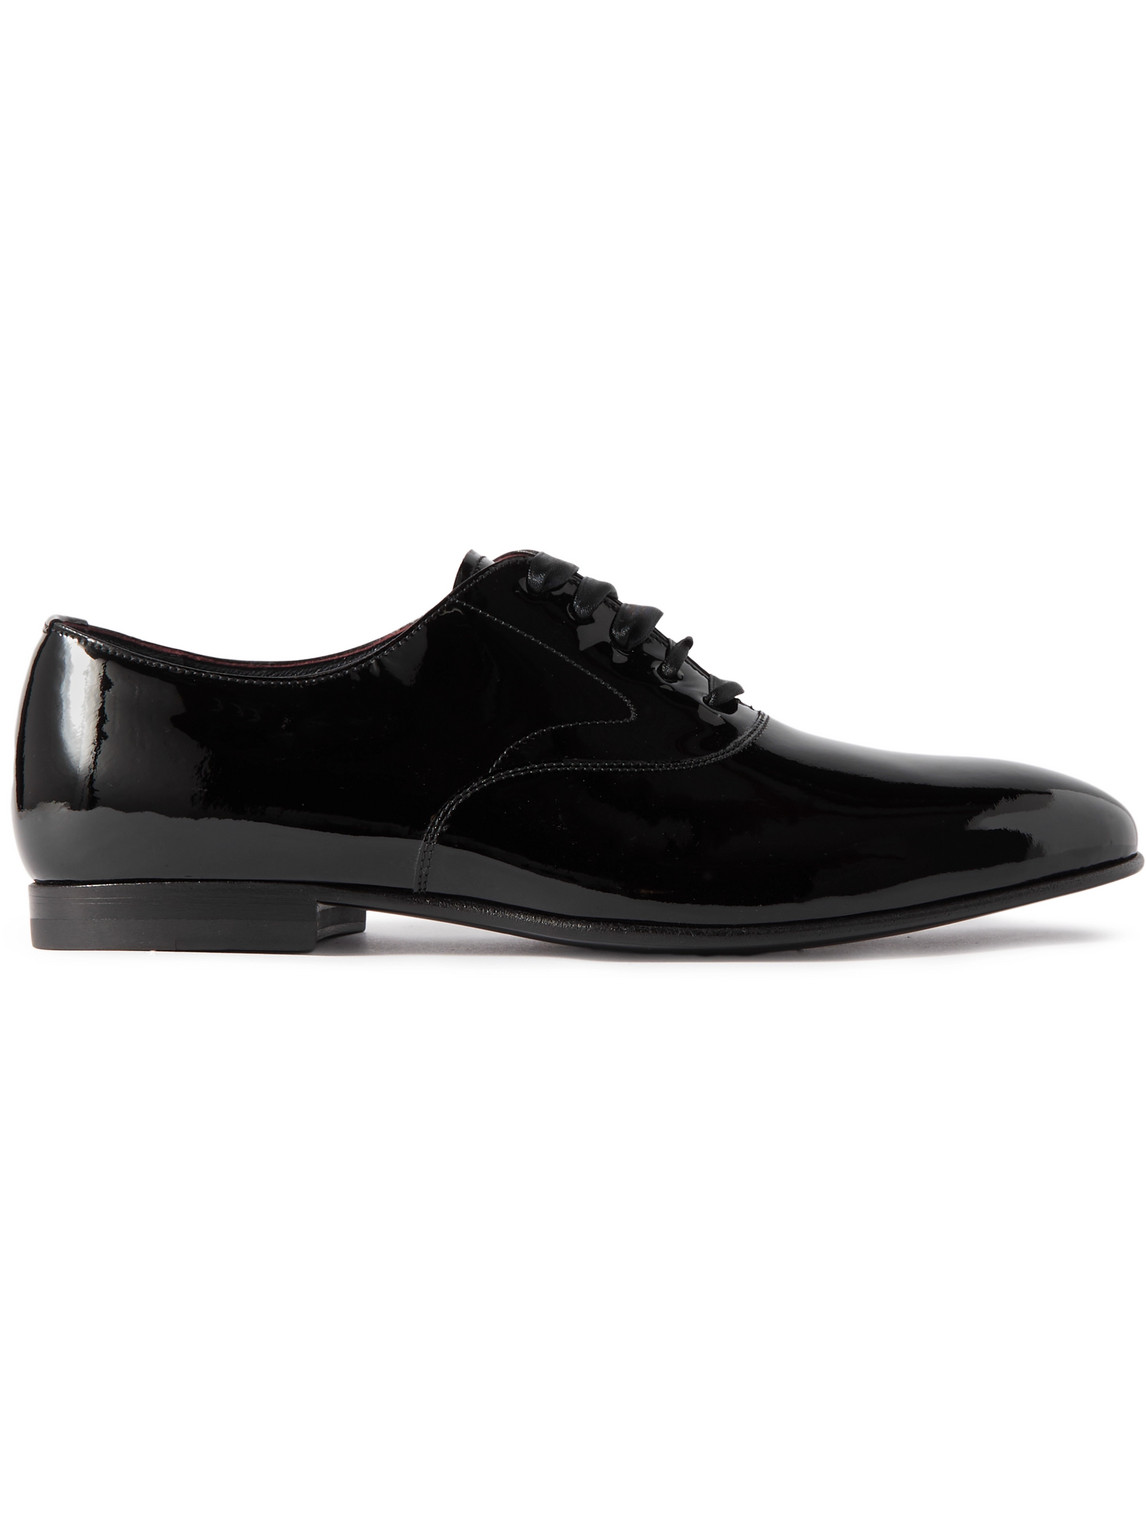 Ralph Lauren Purple Label Paget Ii Patent-leather Oxford Shoes In Black